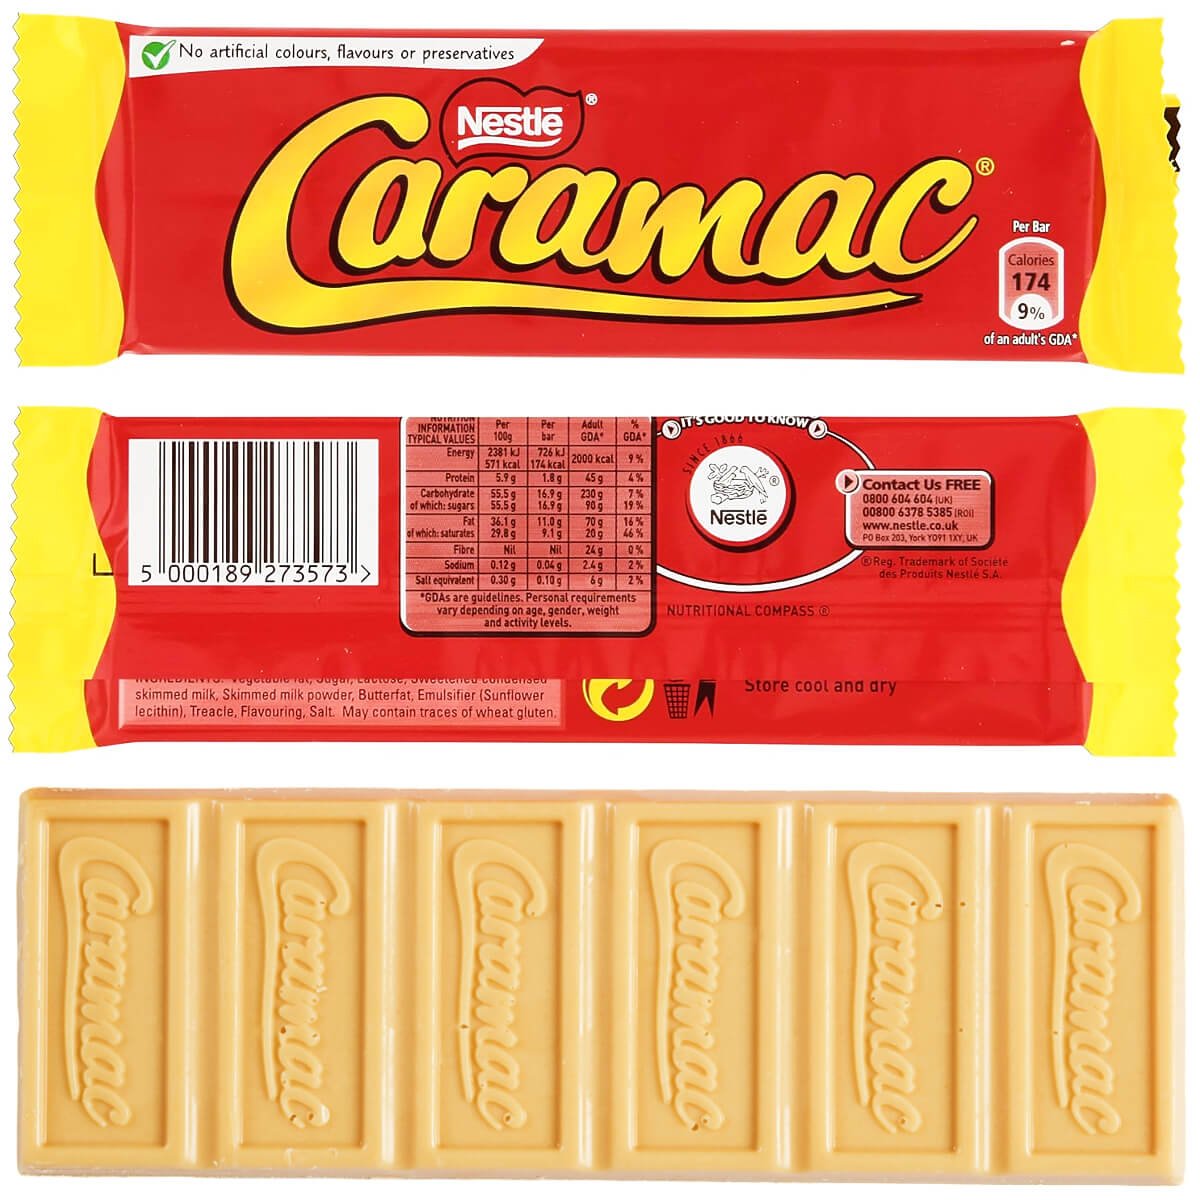 The Demise of Caramac: Saying Goodbye to a Sweet Classic